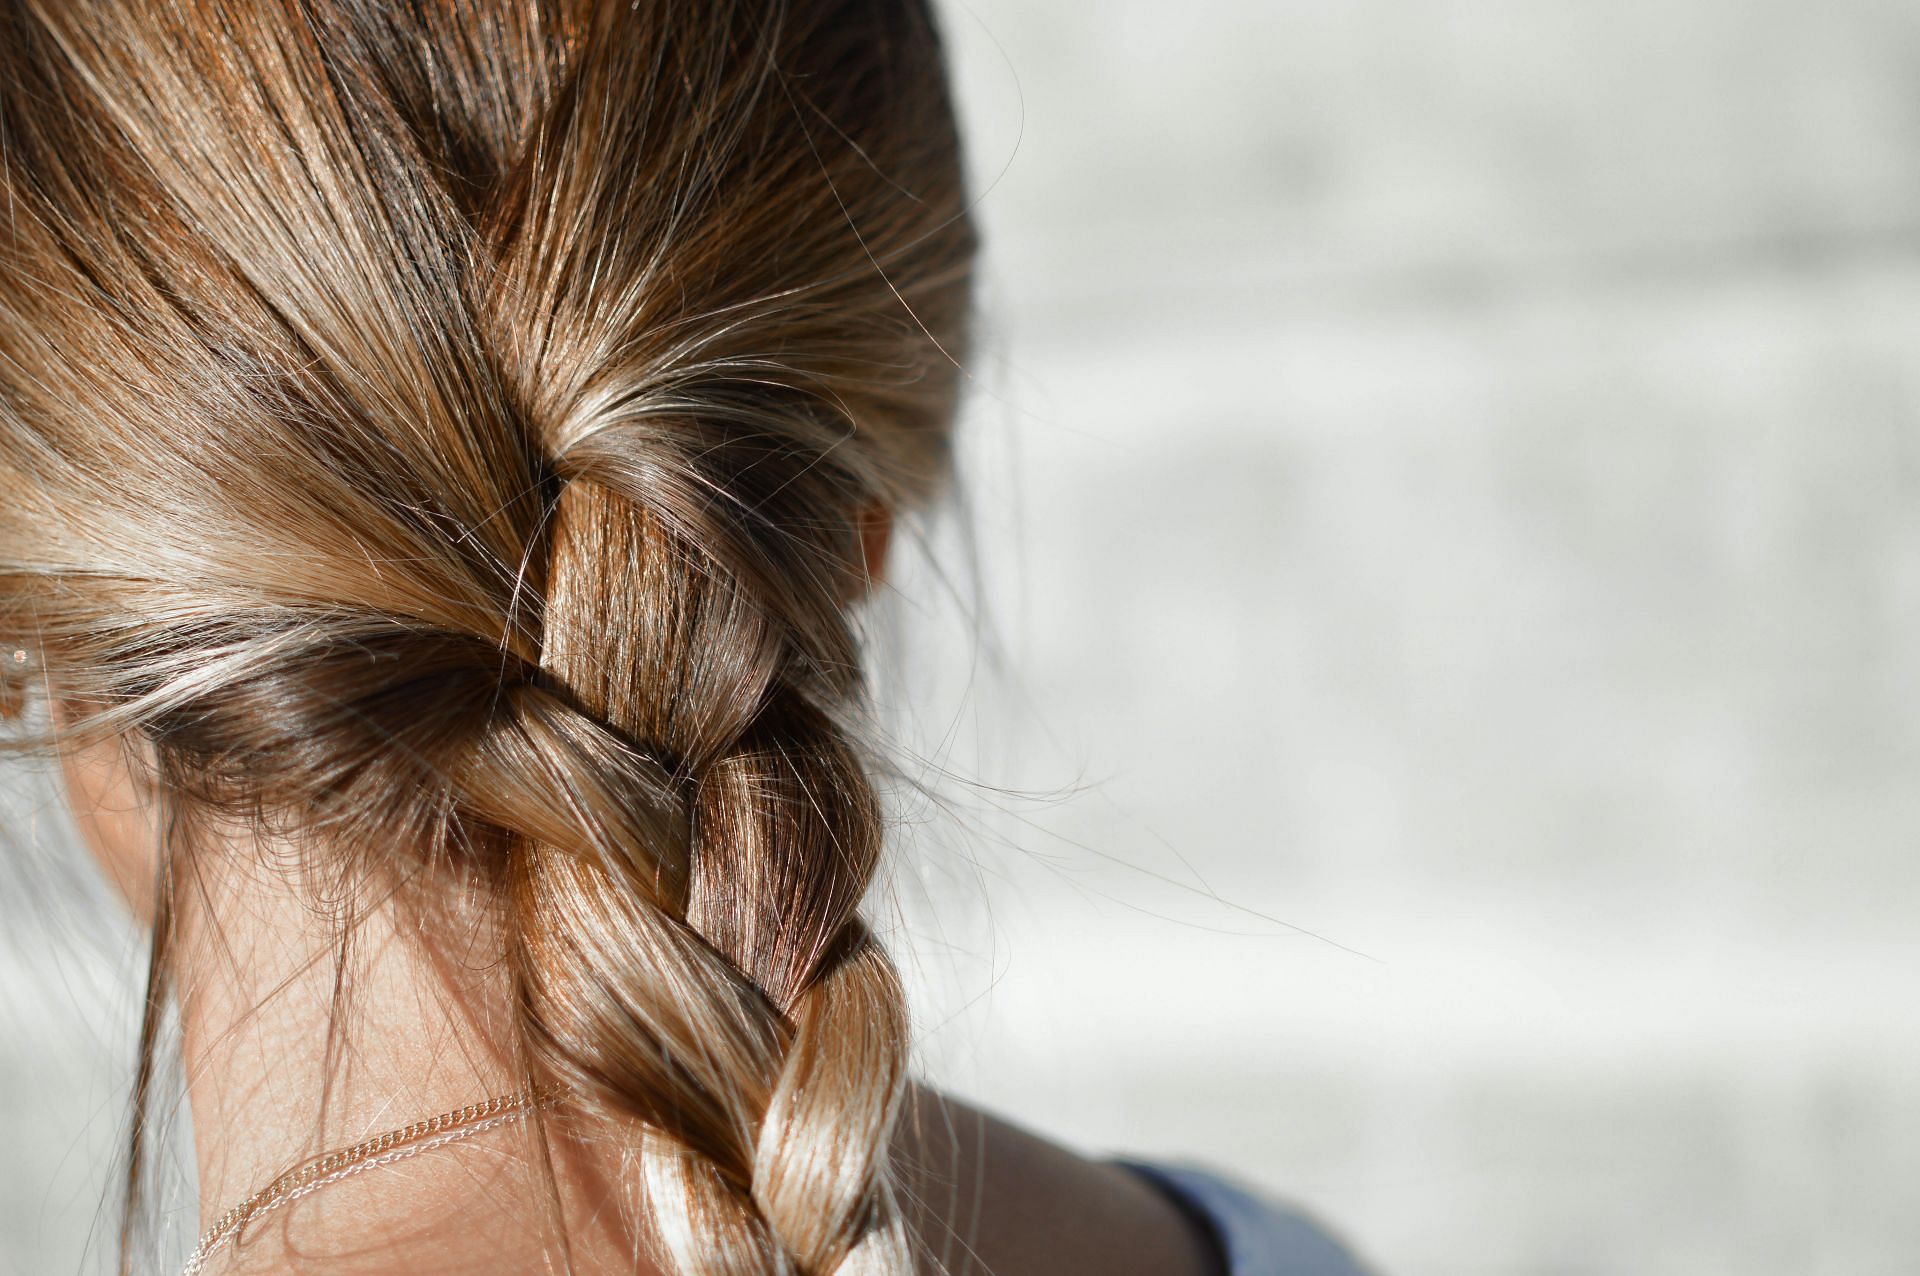 Did you know? Physical Activity and Exercise Affects Hair Growth (Image via Pexels)